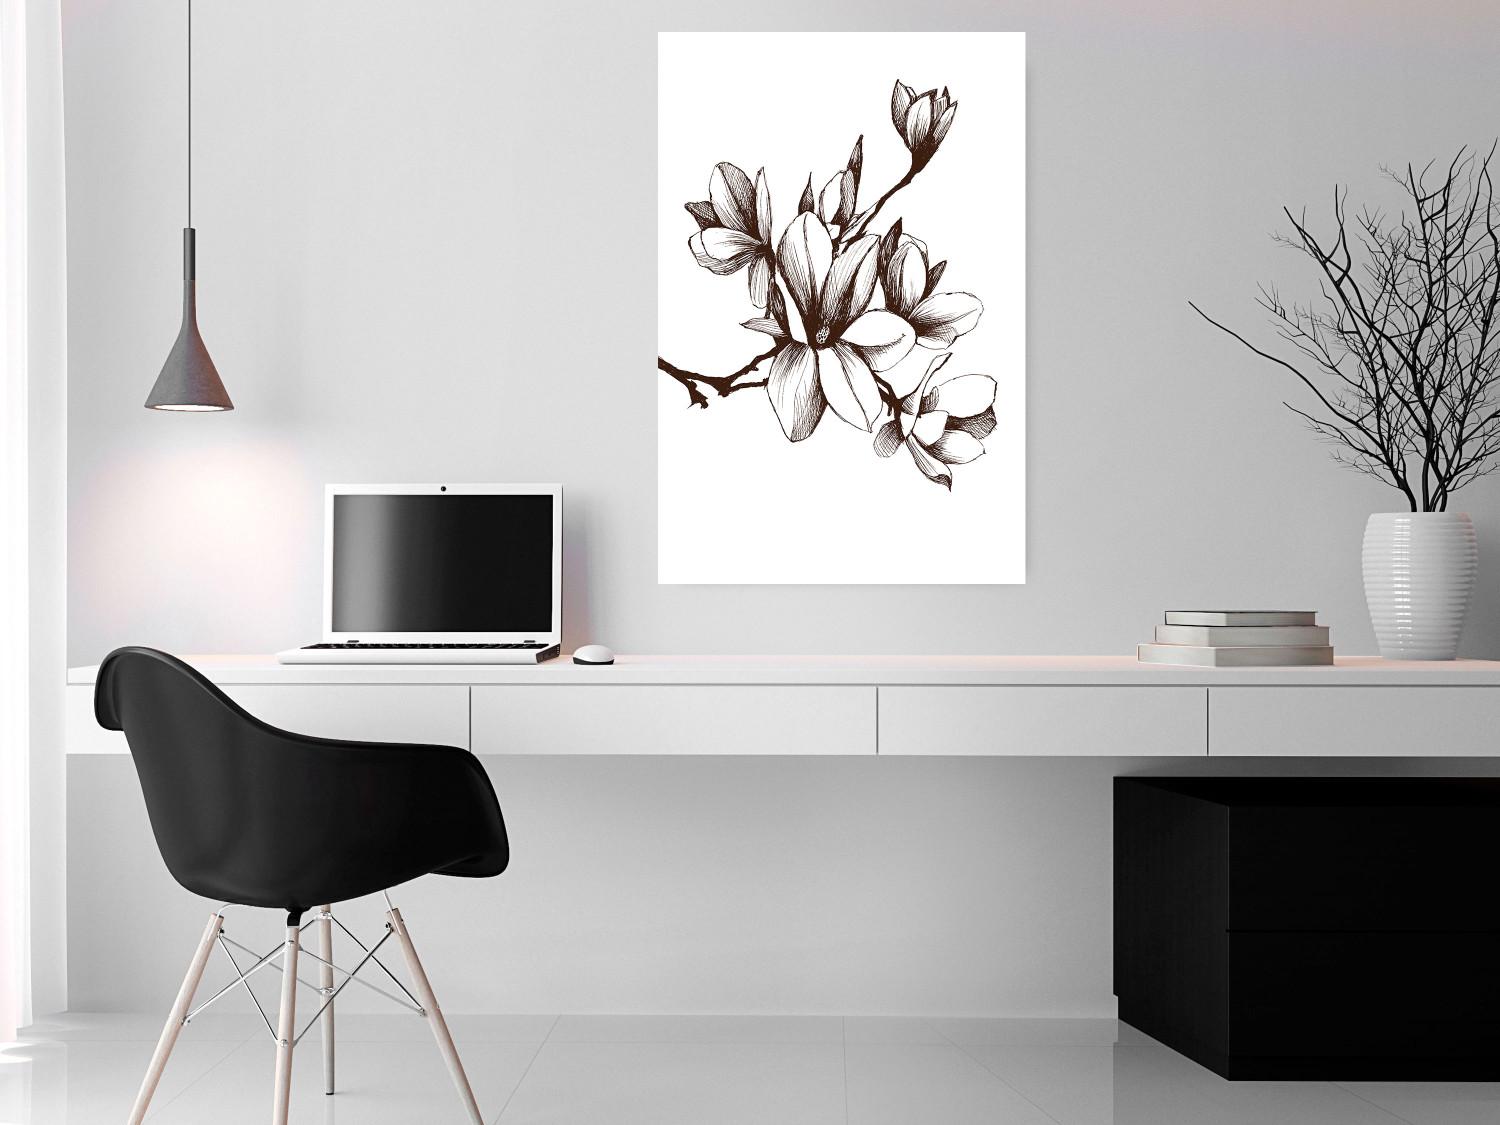 Poster Renaissance Magnolias - black and white composition with delicate flowers